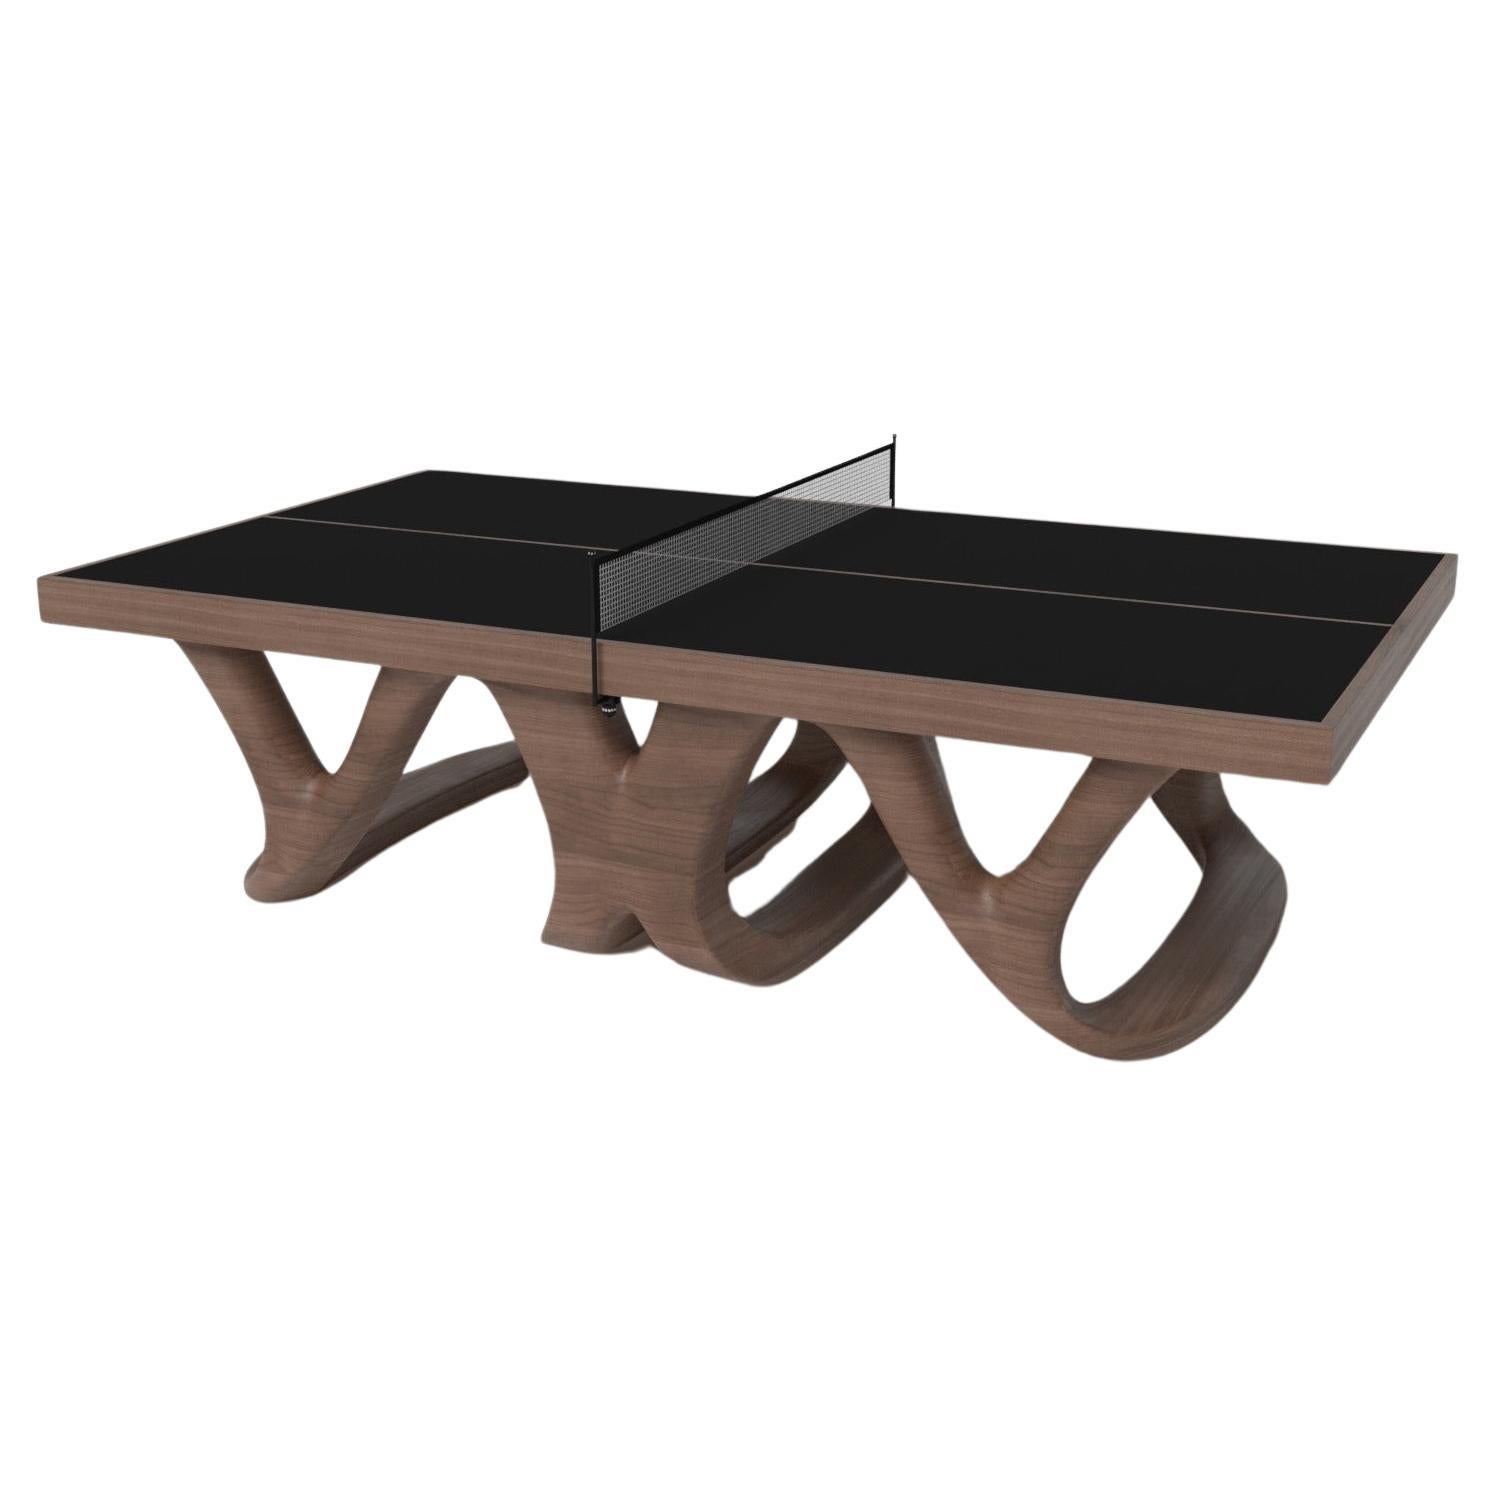 Elevate Customs Draco Tennis Table / Solid Walnut Wood in 9' - Made in USA For Sale